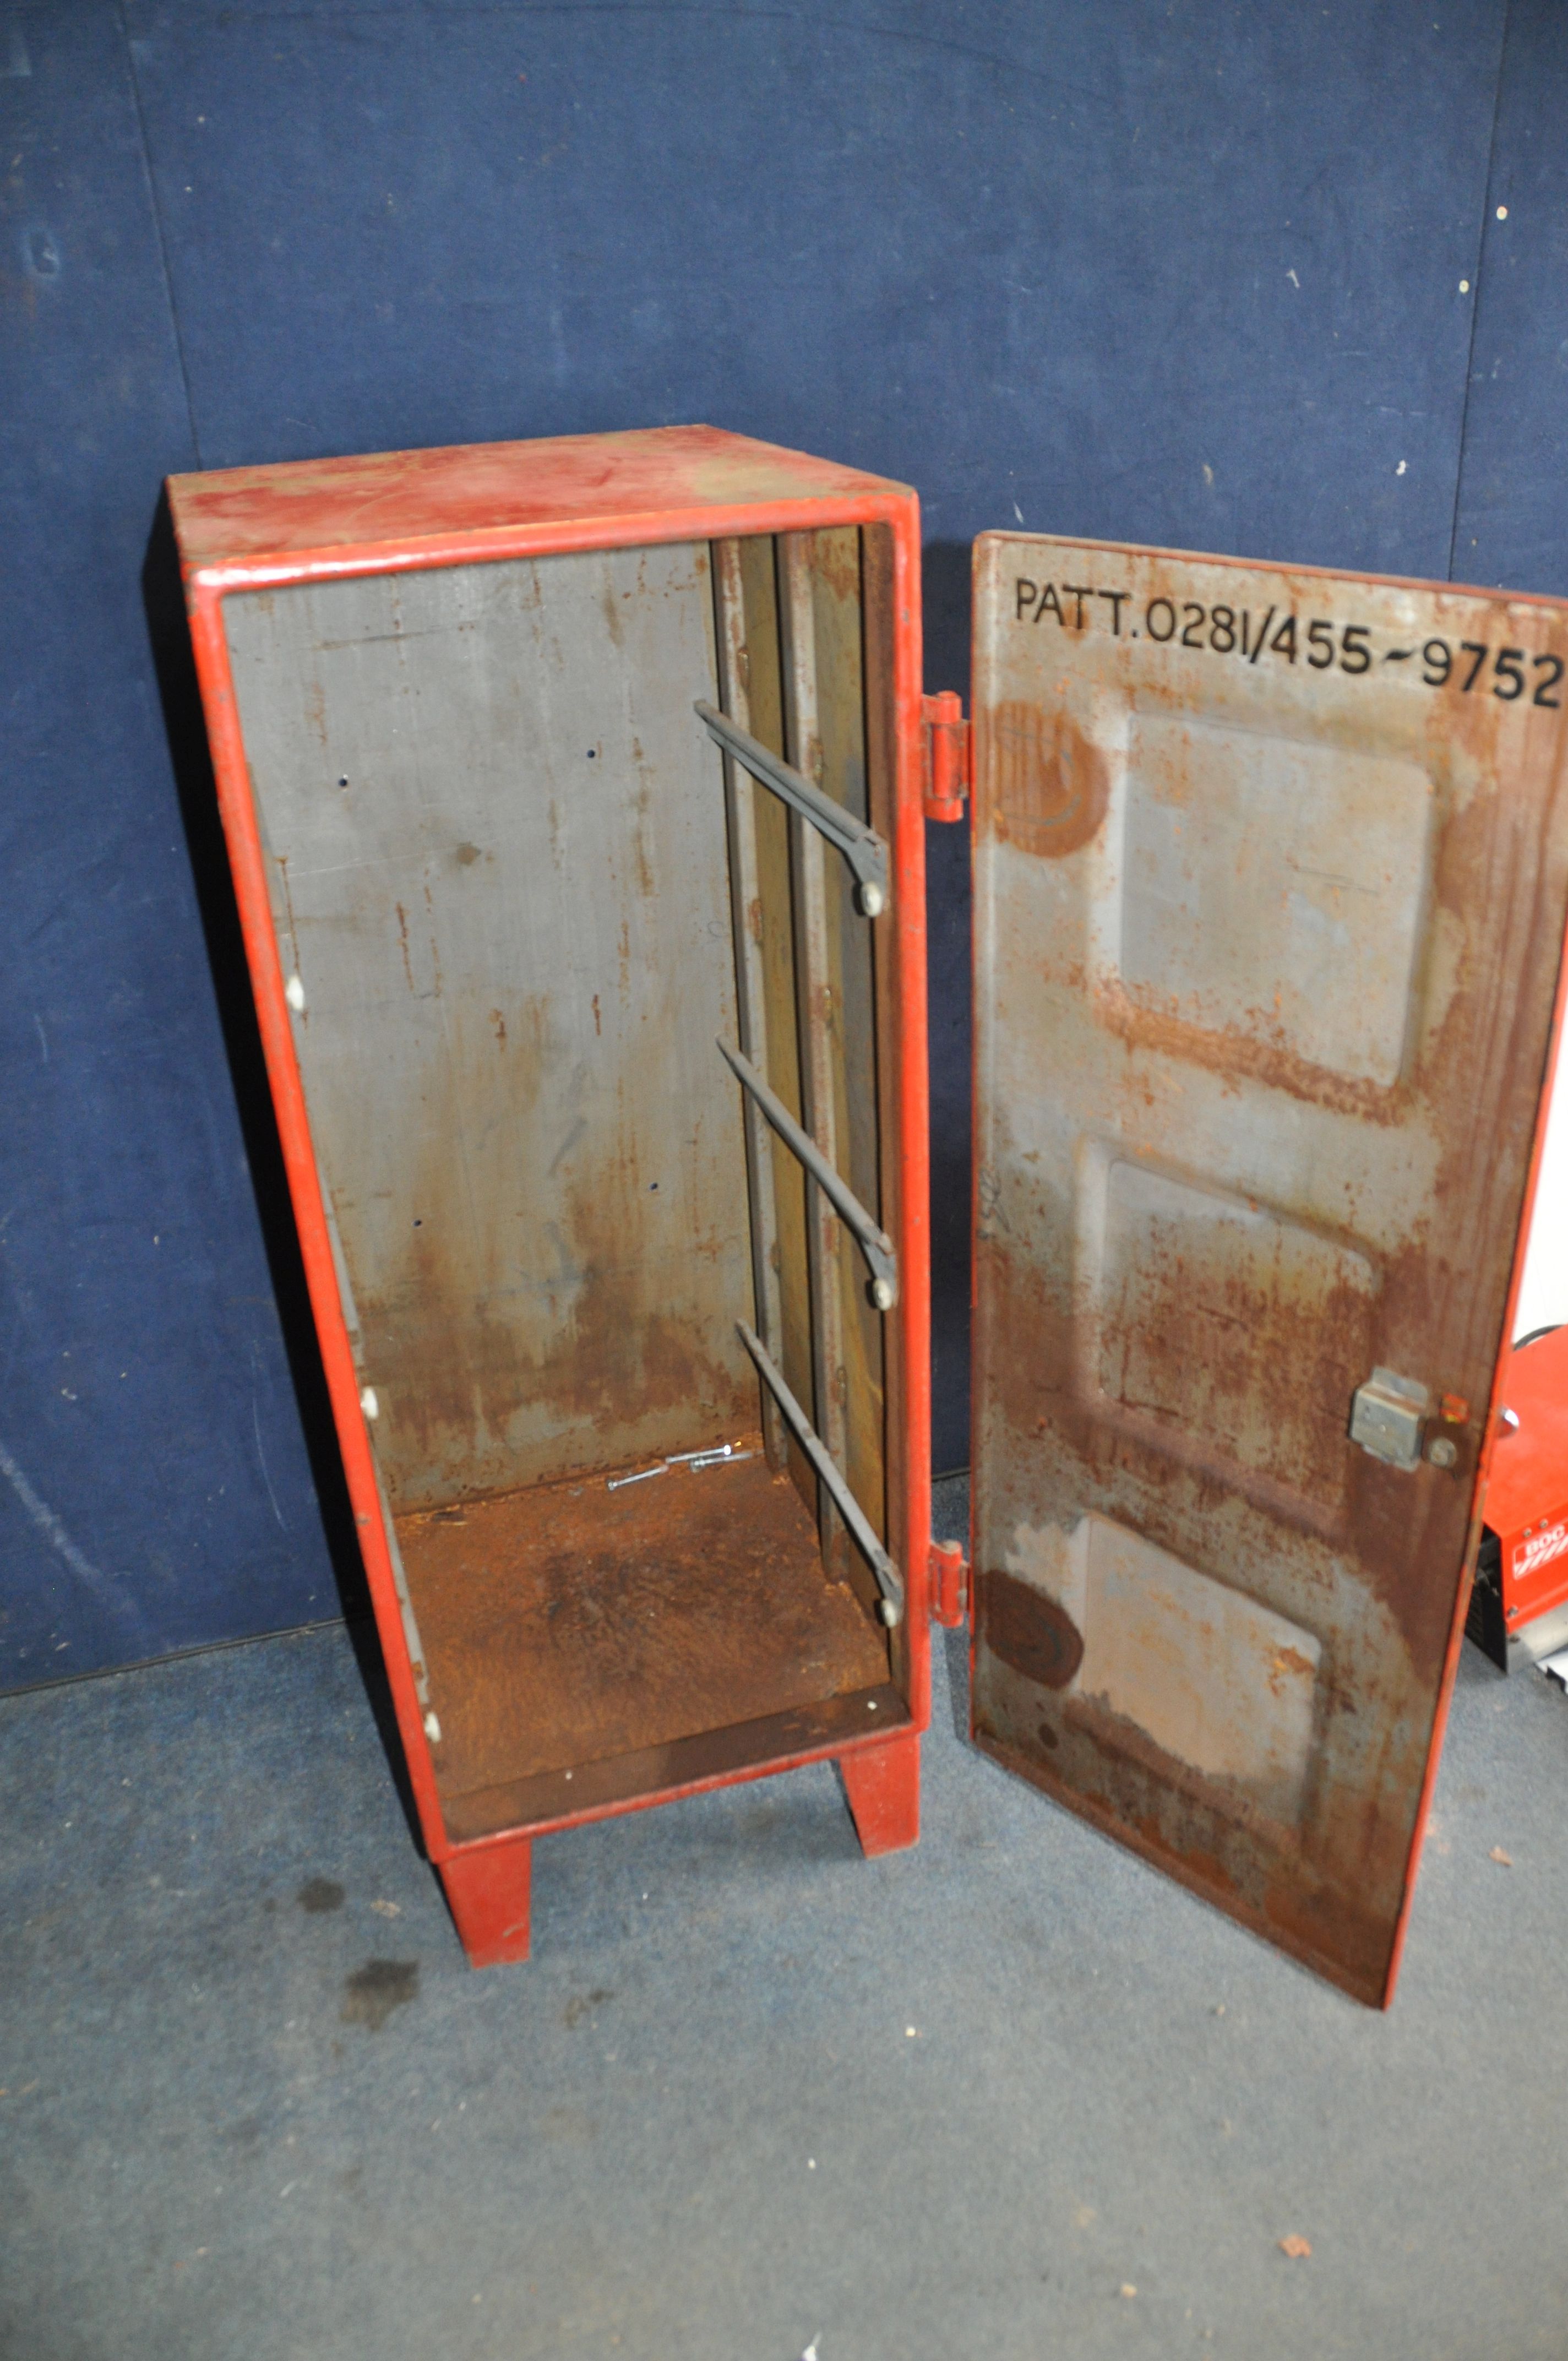 A MILITARY SINGLE DOOR METAL CABINET with three keys, width 46cm depth 50cm height 122cm - Image 2 of 3